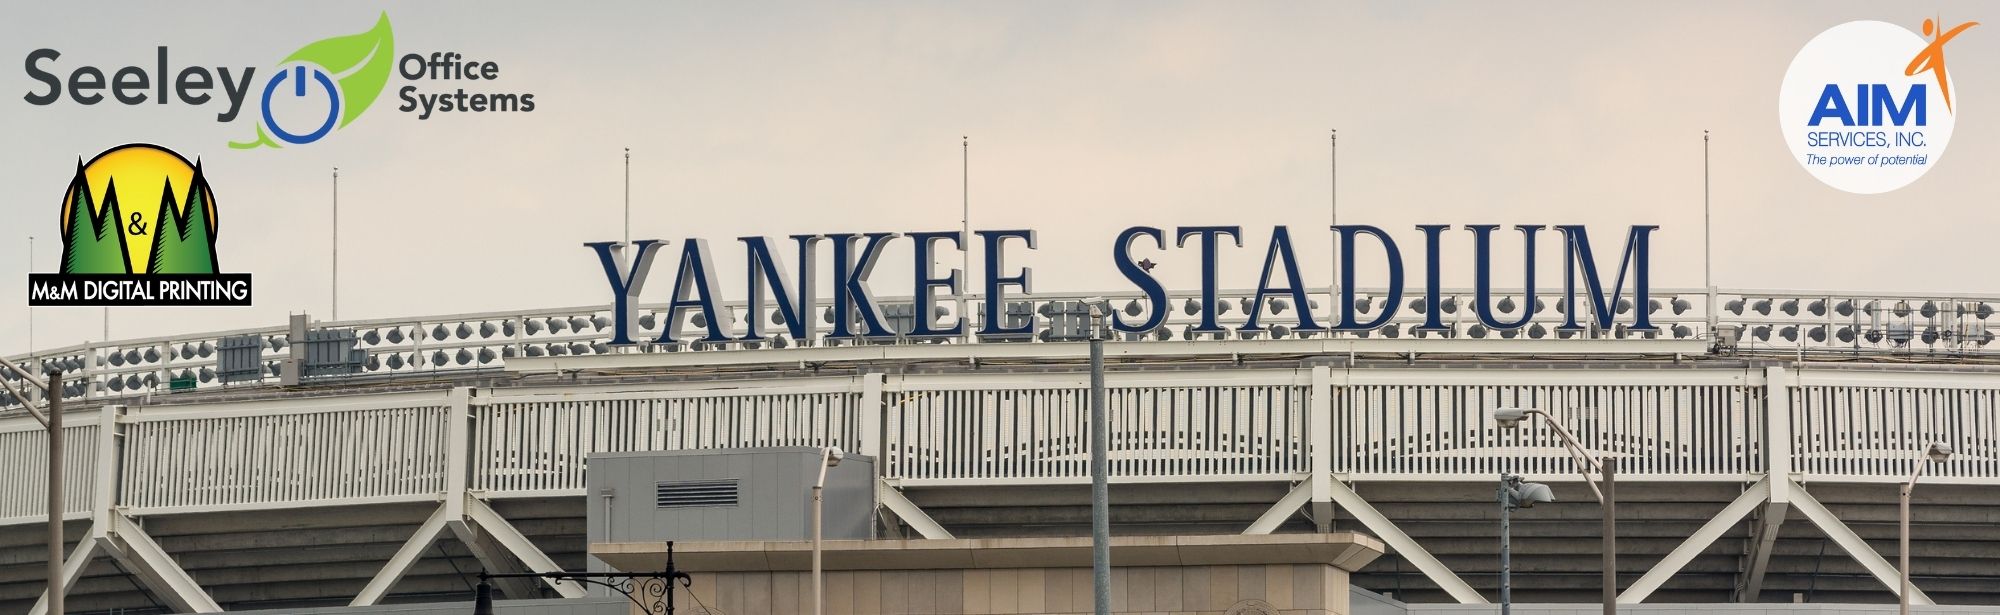 yankee stadium entrance picture with seeley office, M&M Printing and AIM Services logo